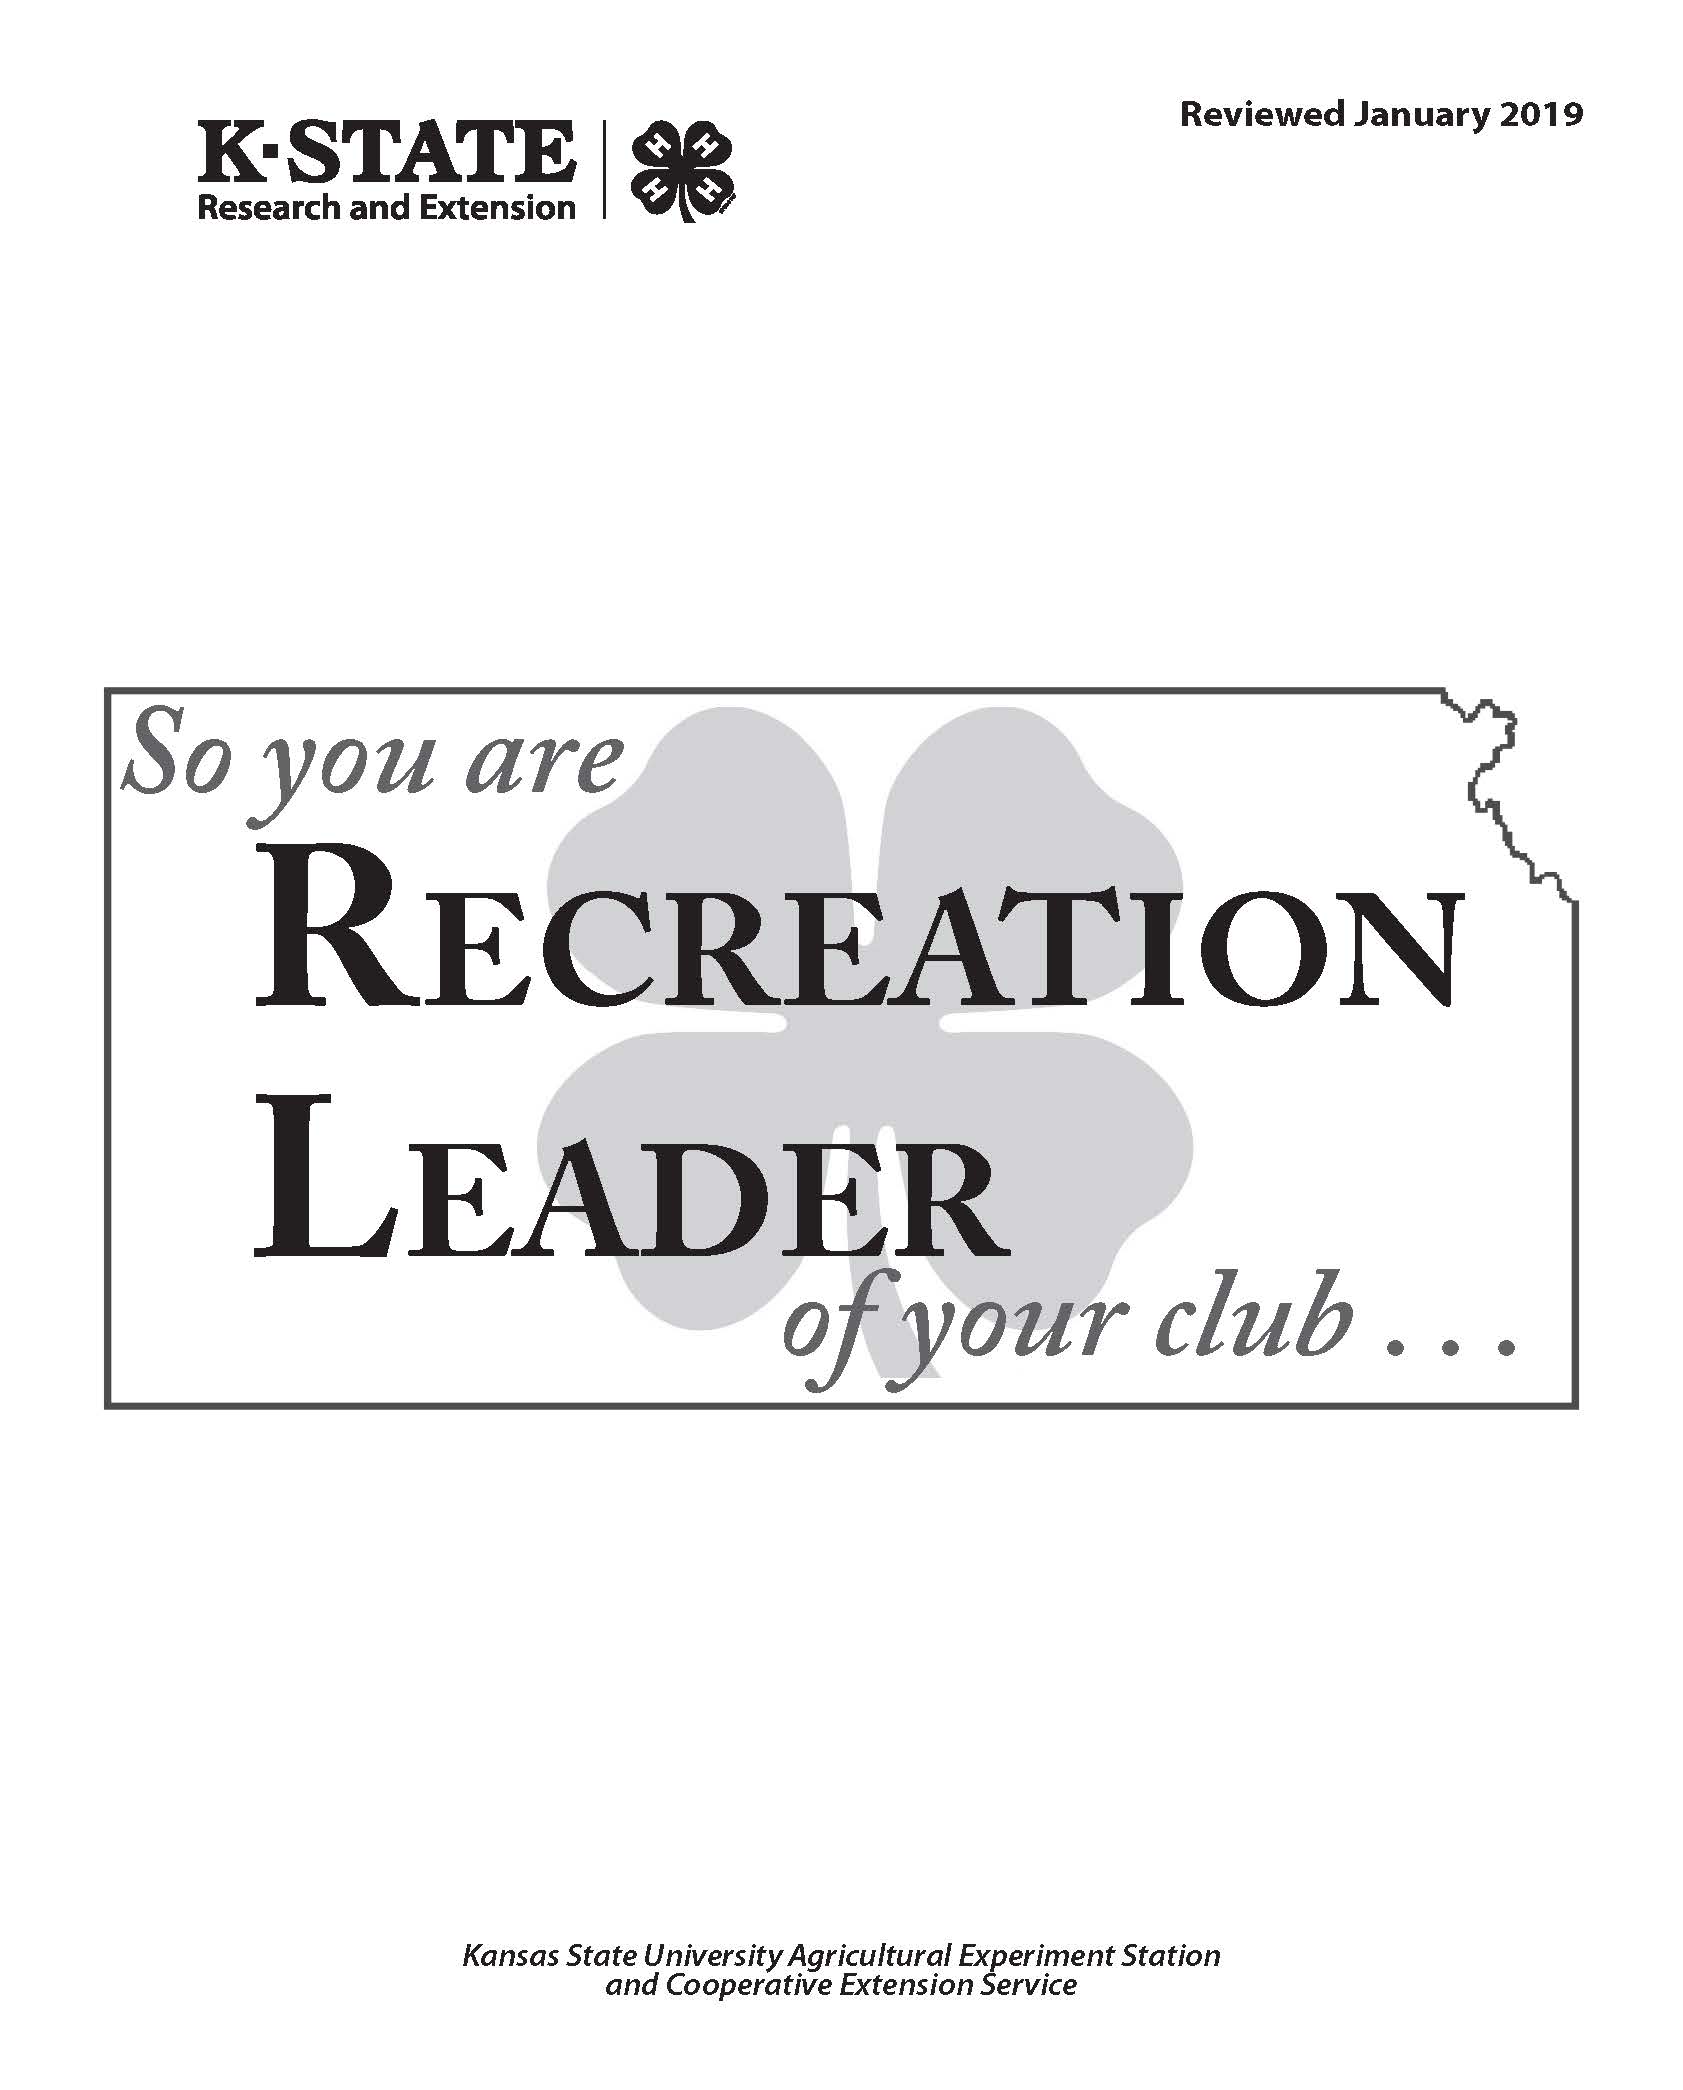 So you are the Recreation Leader of your club